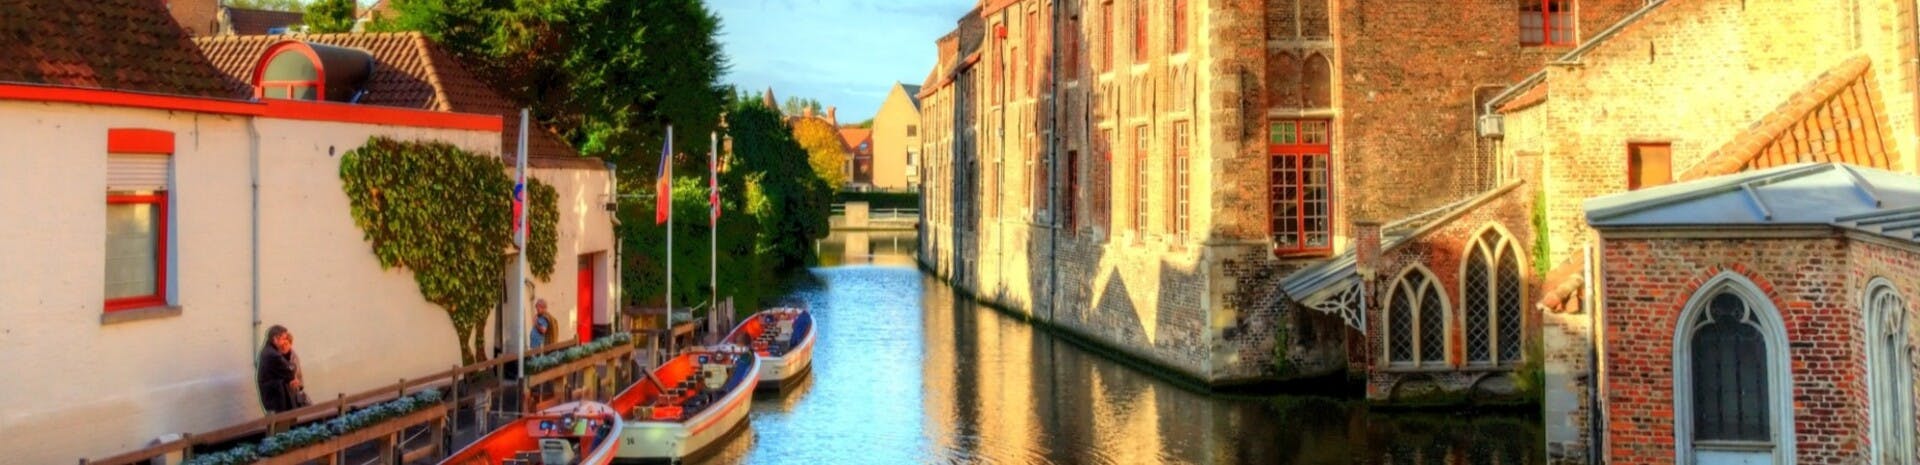 Picture of Brugge